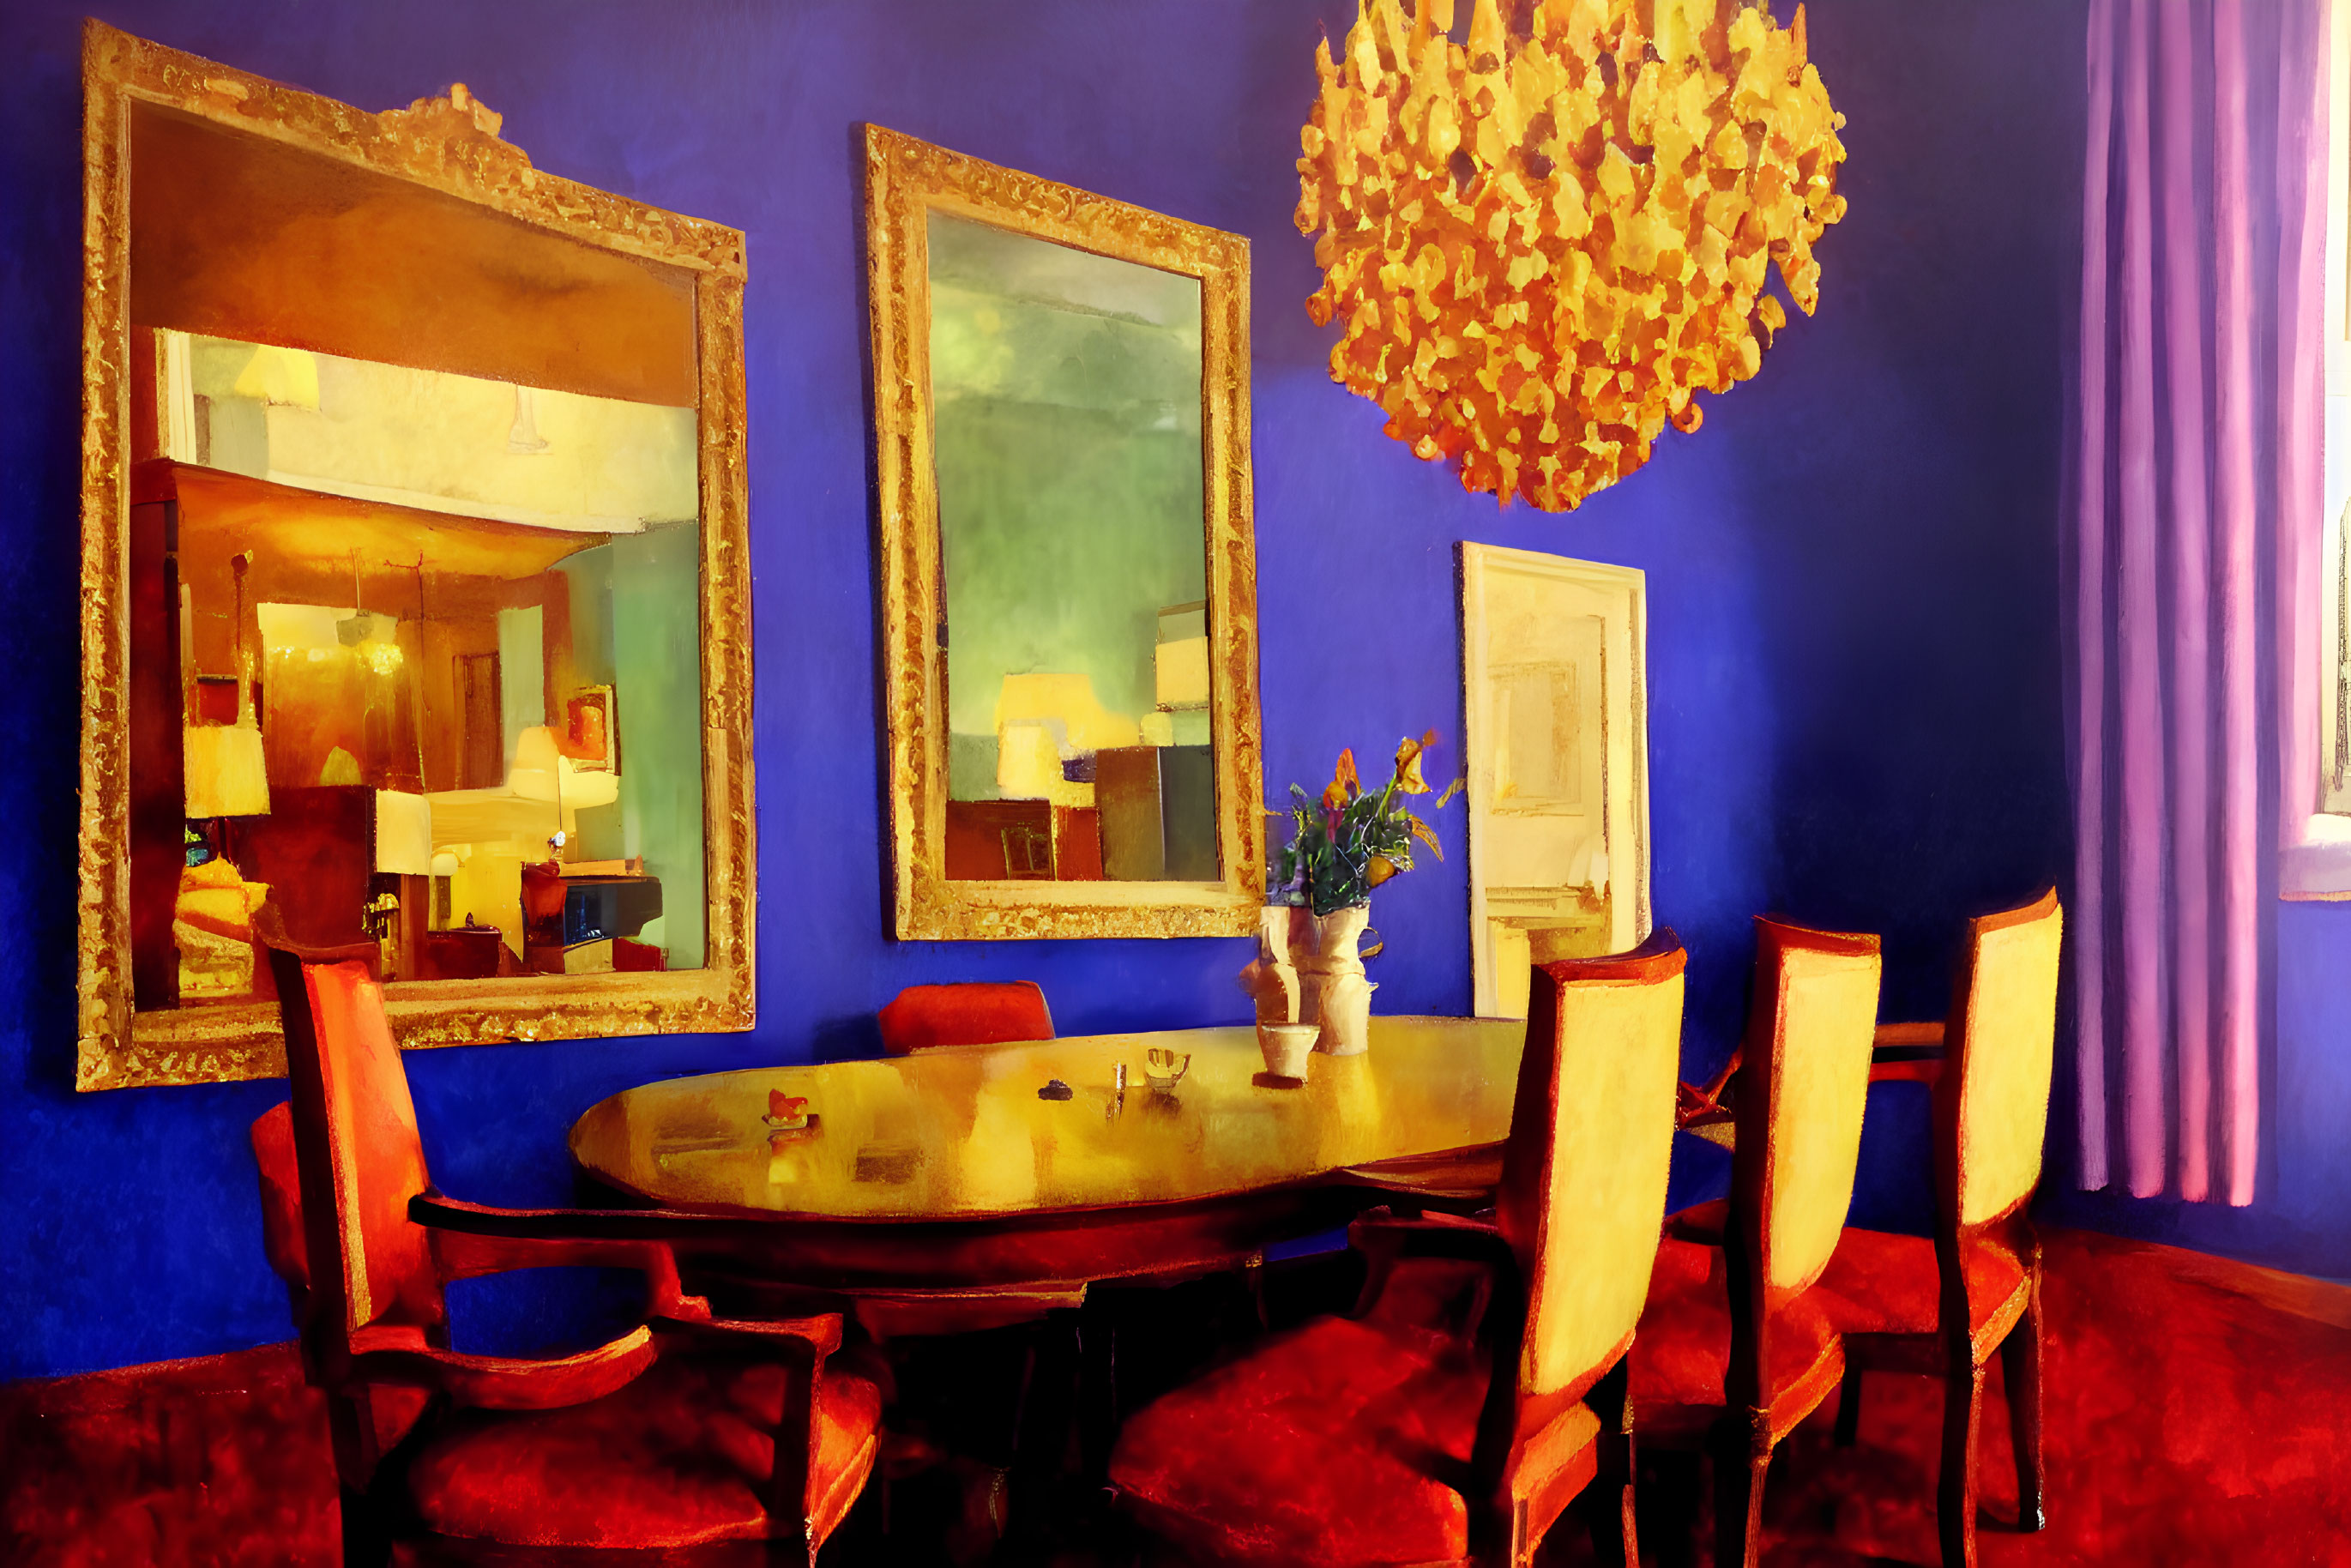 Sophisticated dining room with wooden table, gold-framed mirrors, chandelier, and blue walls